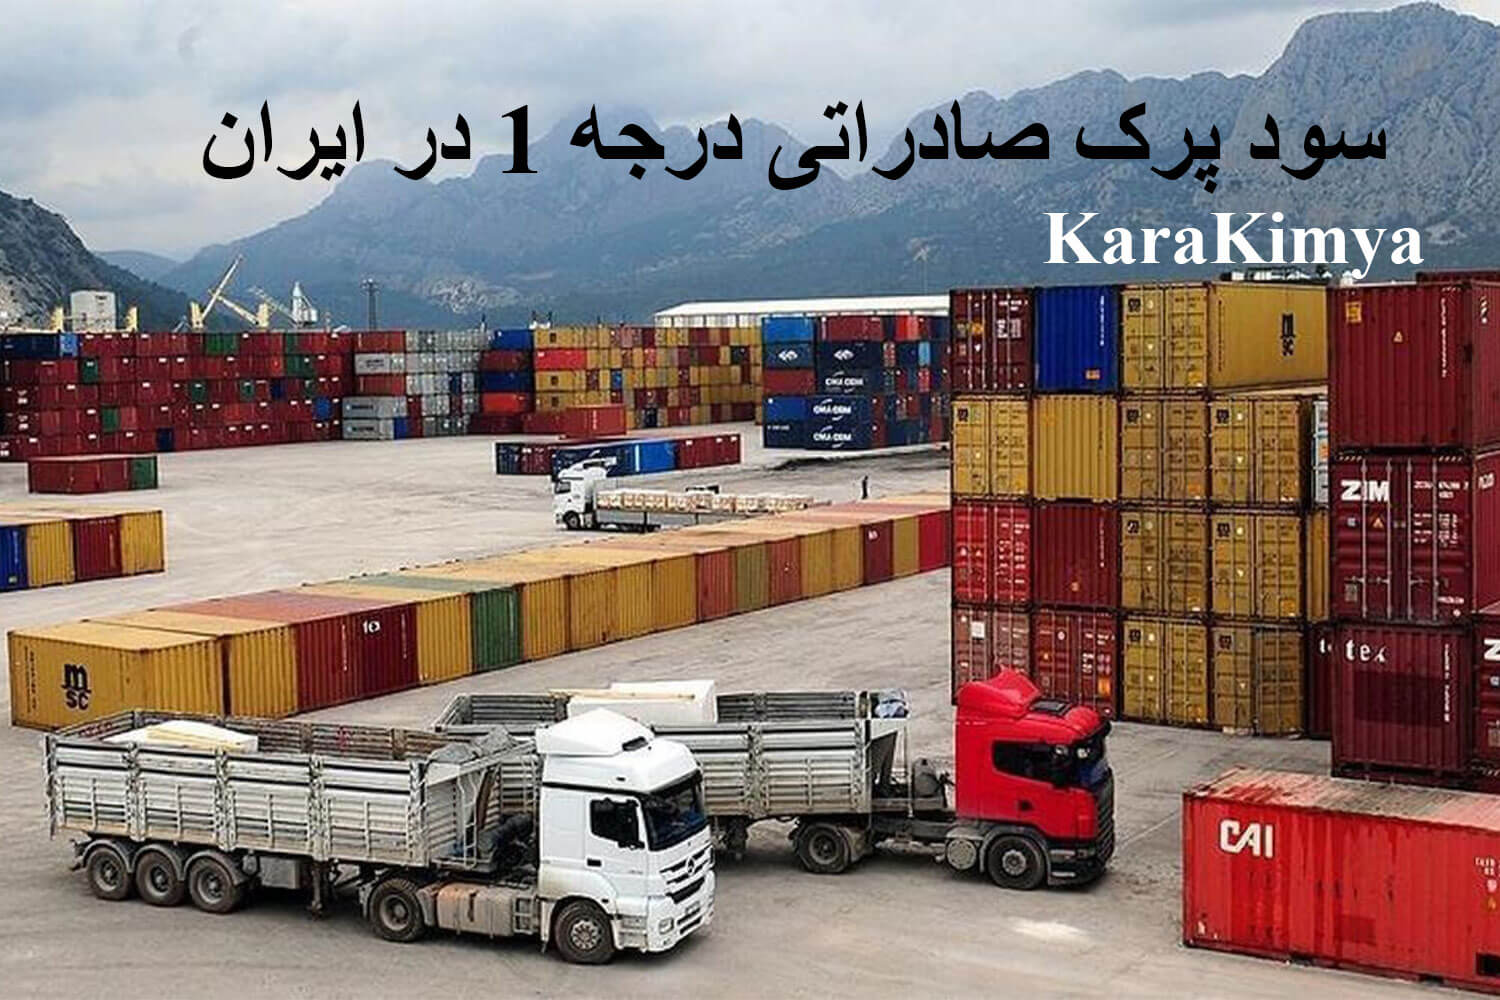 Caustic Soda Flakes for export grade 1 in Iran